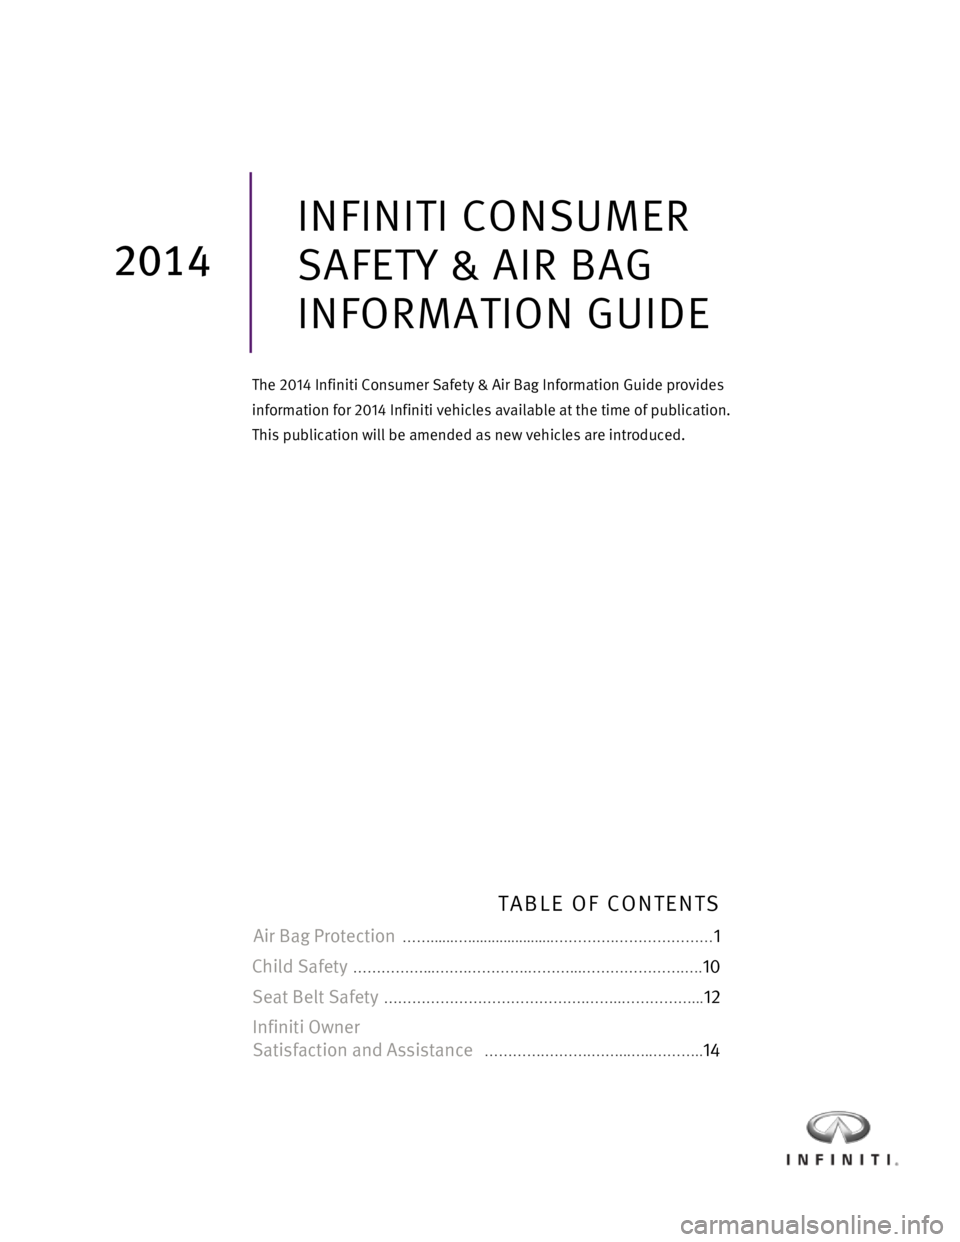 INFINITI Q70 2014  Consumer Safety And Air Bag Information Guide 2014 Infiniti Consumer Safety & Air Bag Information Guide                                         0 
 
 
 
 
 
 
 
 
 
 
 
 
 
 
 
 
 
 
 
 
 
 
 
 
 
 
 
 
 
 
 
 
INFINITI CONSUMER  
SAFETY & AIR BA